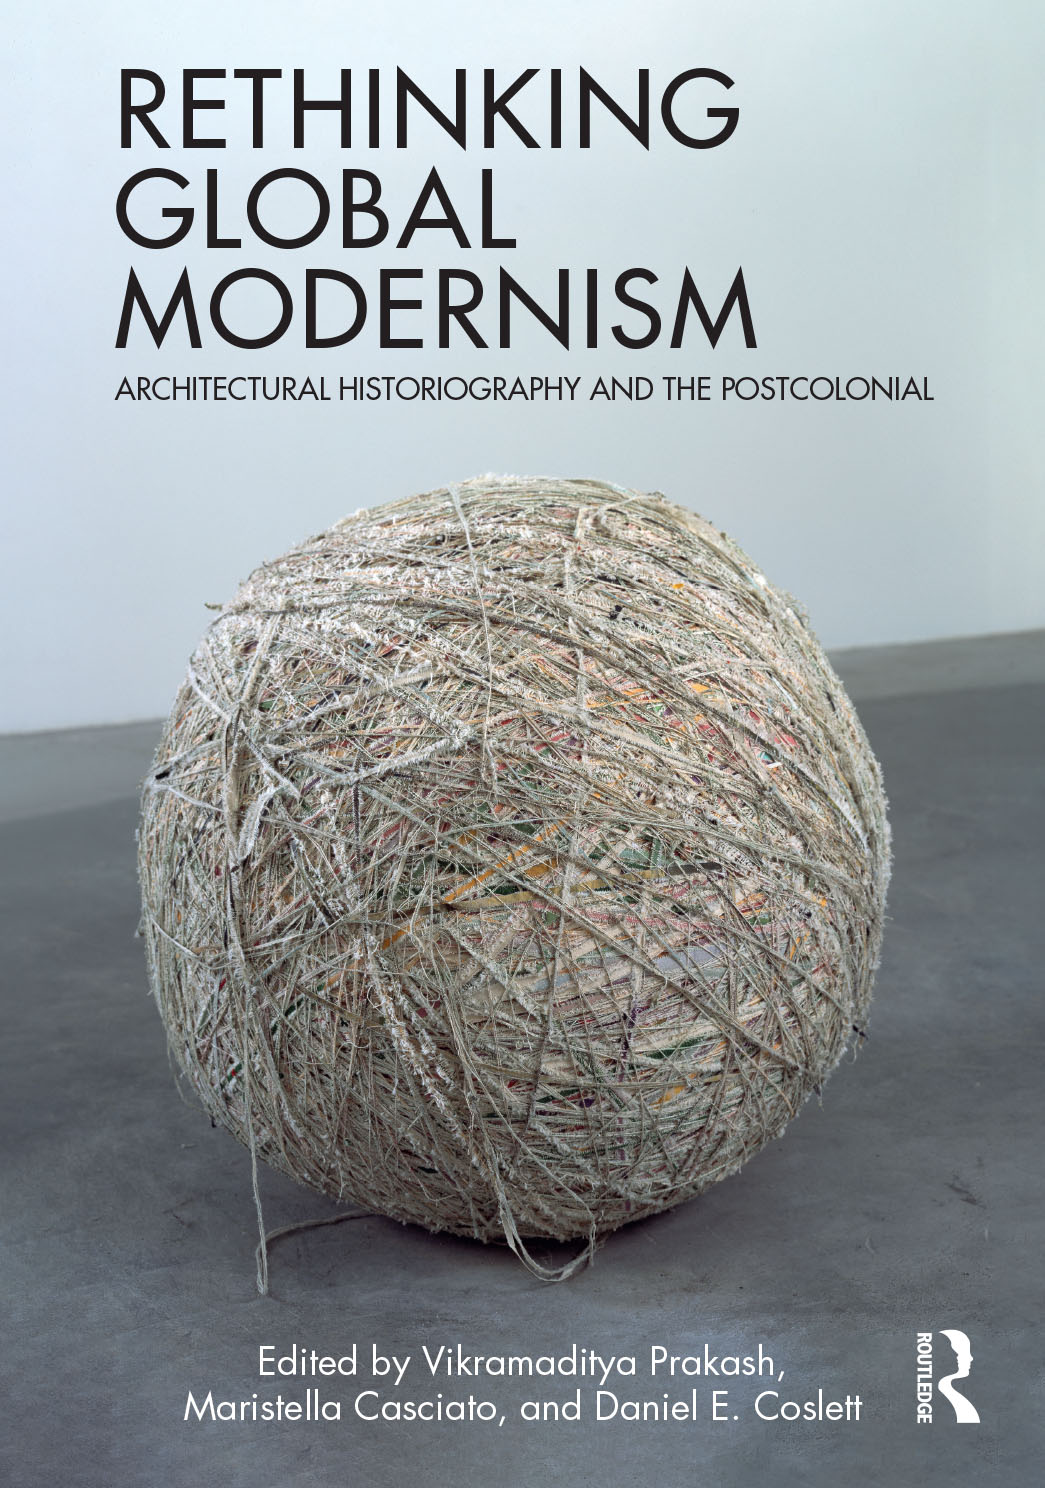 An Architecture Culture of Contact Zones: Prospects for an Alternative Historiography of Modernism